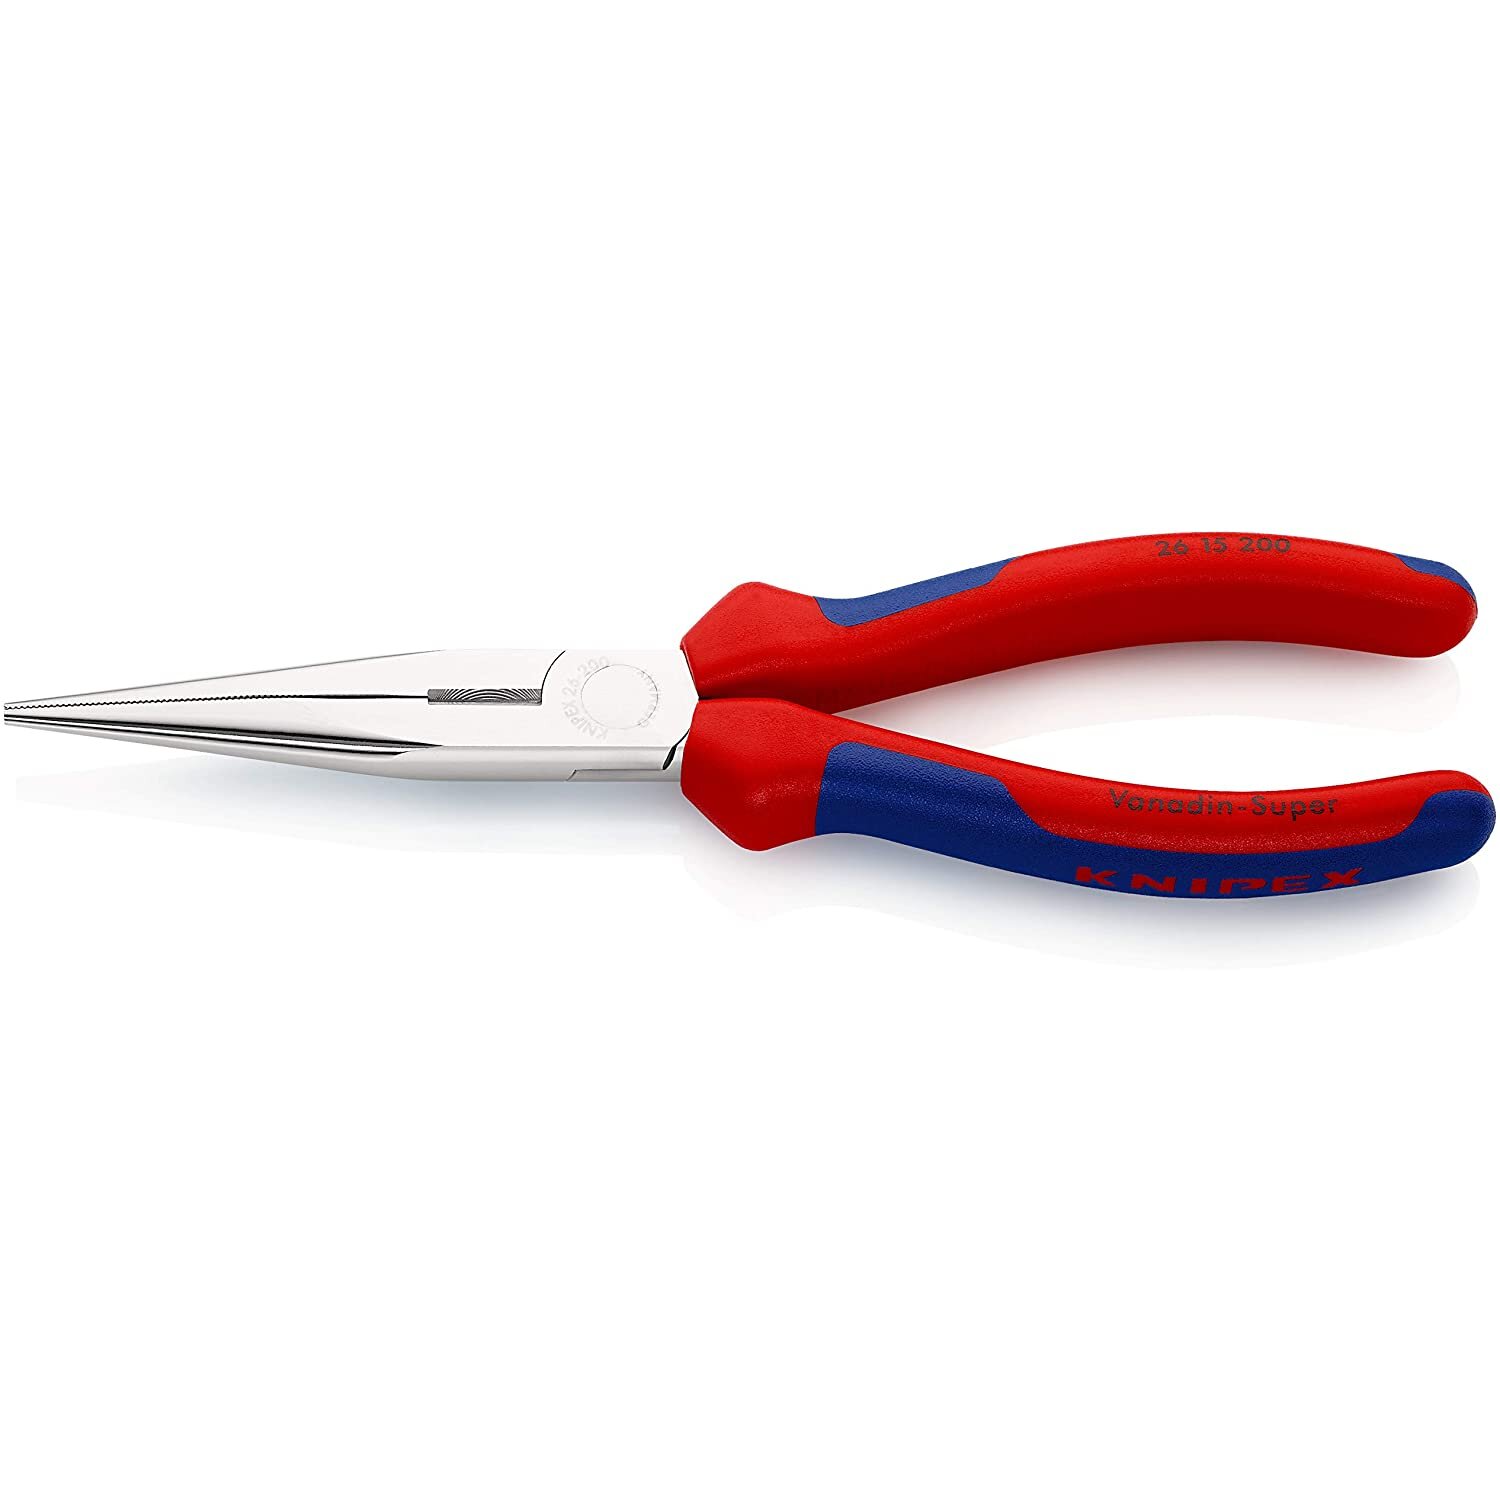 KNIPEX Snipe Nose Side Cutting Pliers (Stork Beak Pliers) (200 mm) 26 15 200